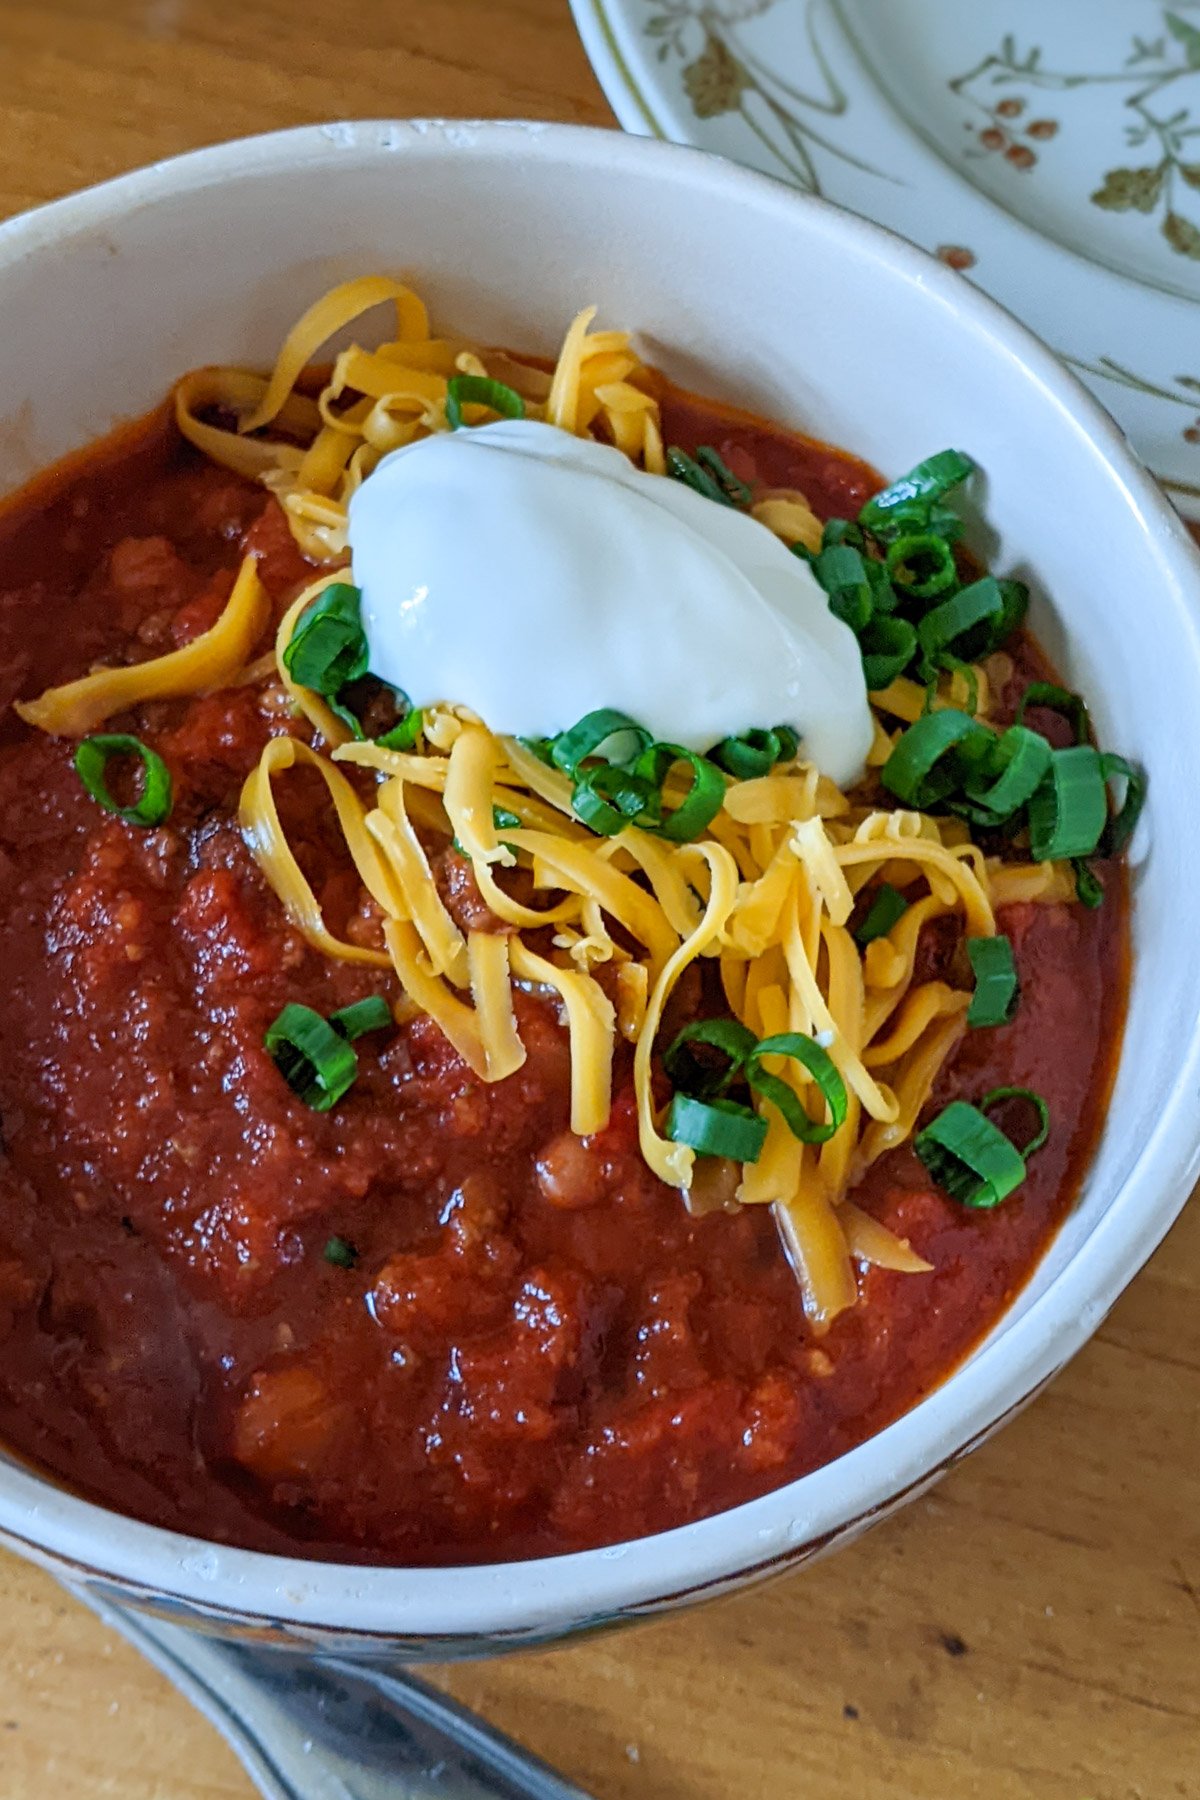 A bowl of ground beef chili topped with shredded cheese, plain yogurt and scallions.